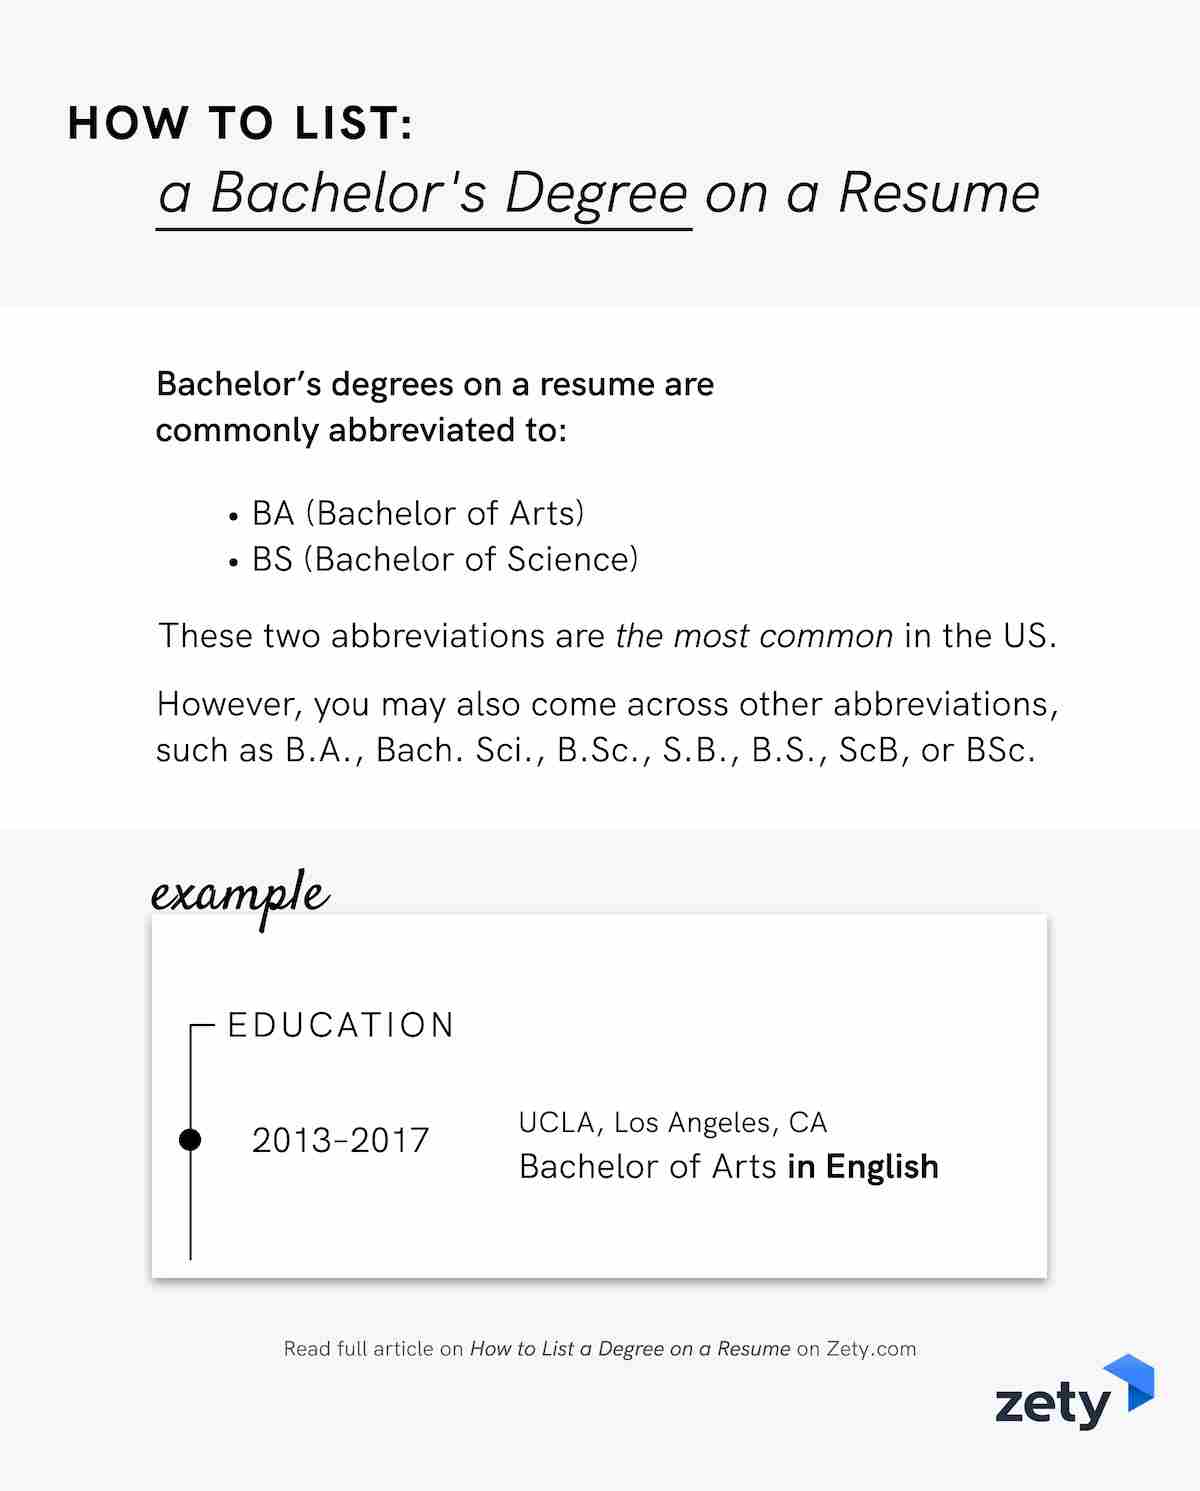 how to list bachelor degree on resume with concentration